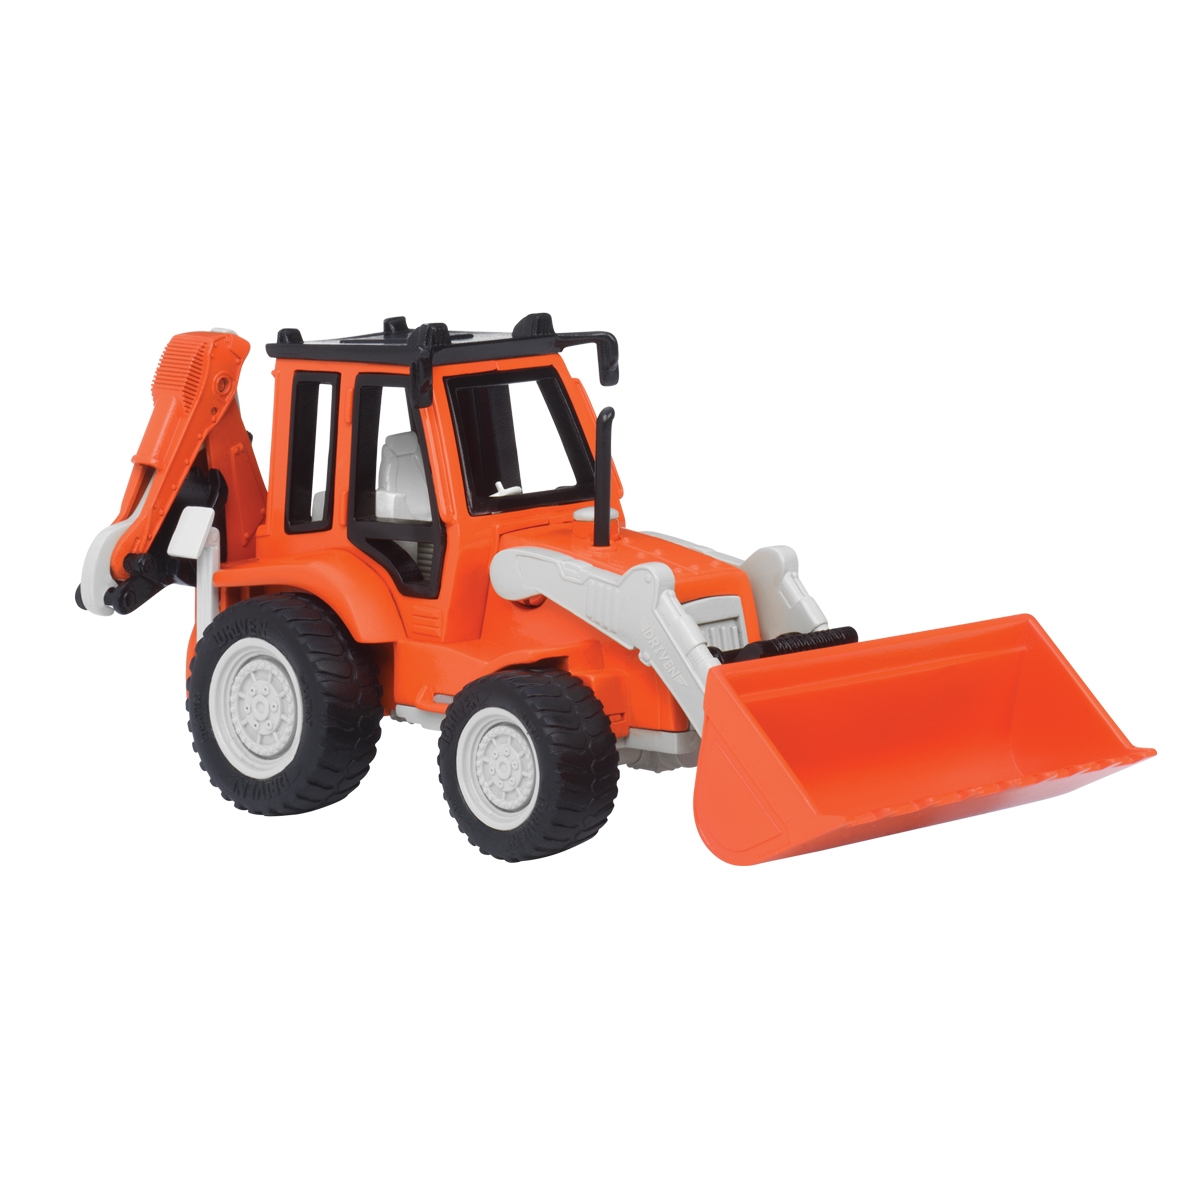 DRIVEN by Battat Backhoe Loader with Sound Effects and Movable Parts for Kids Aged 3+ Micro Backhoe Loader